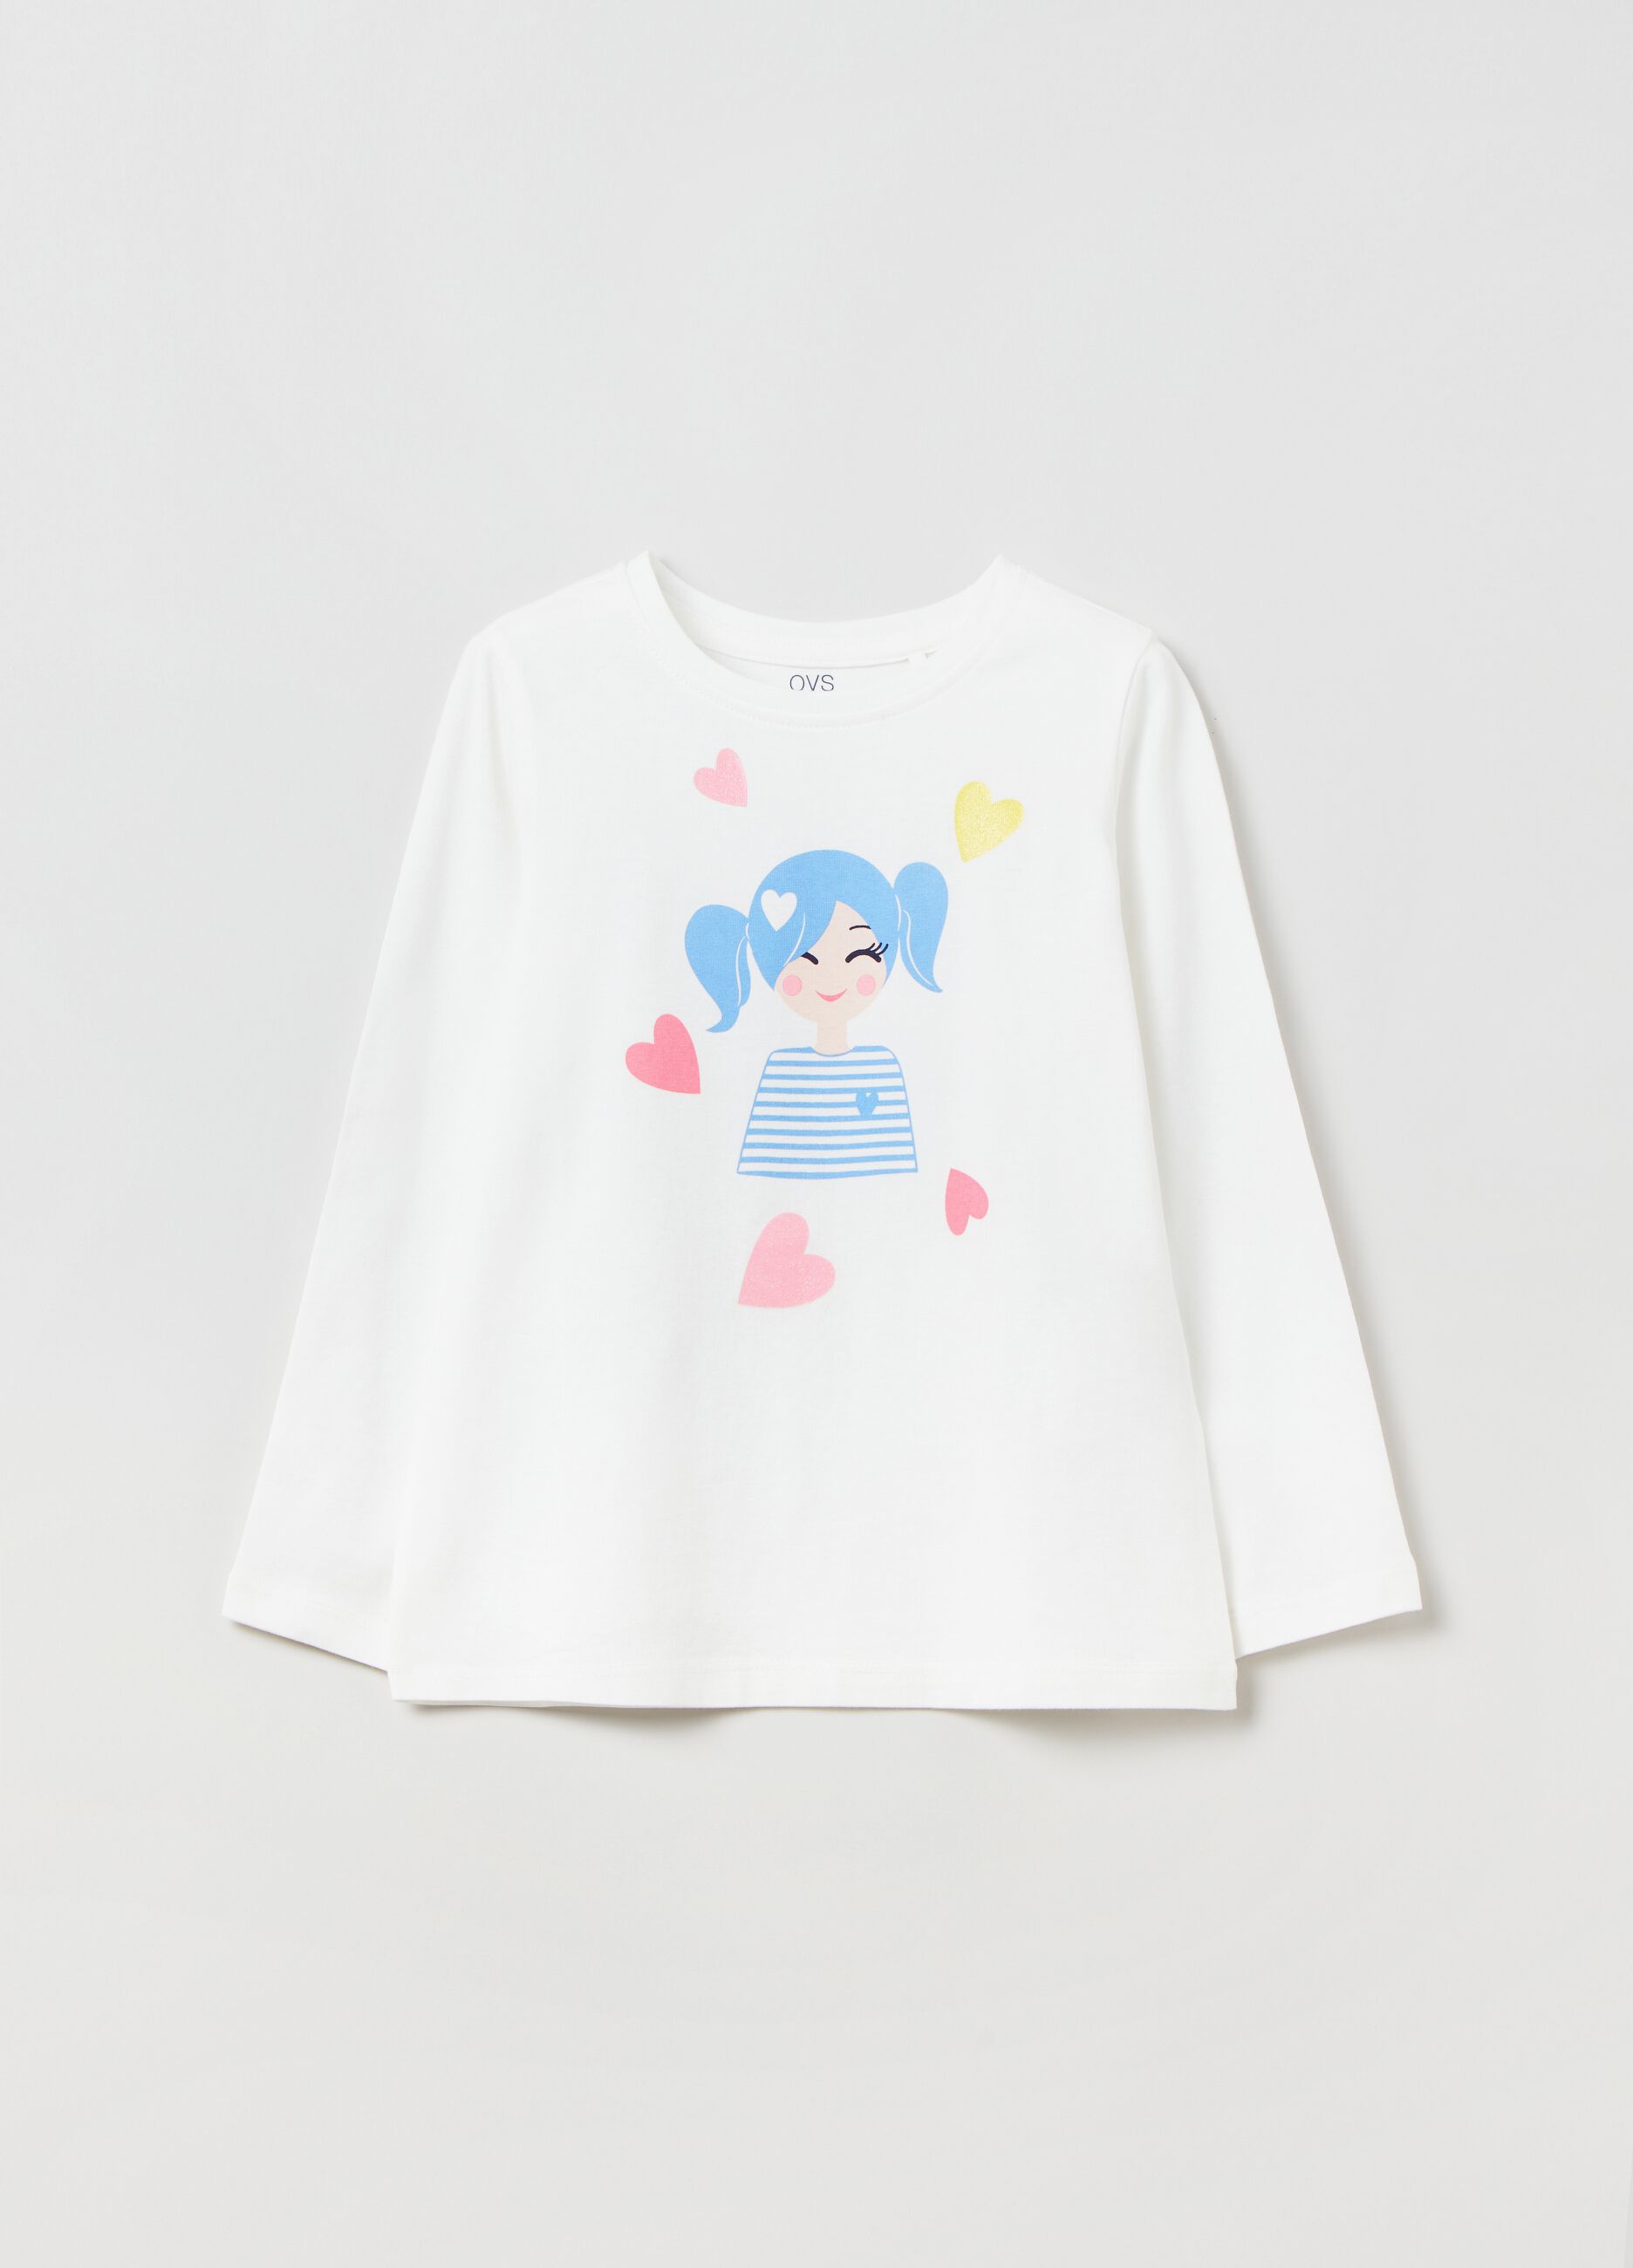 Cotton T-shirt with girl and hearts print